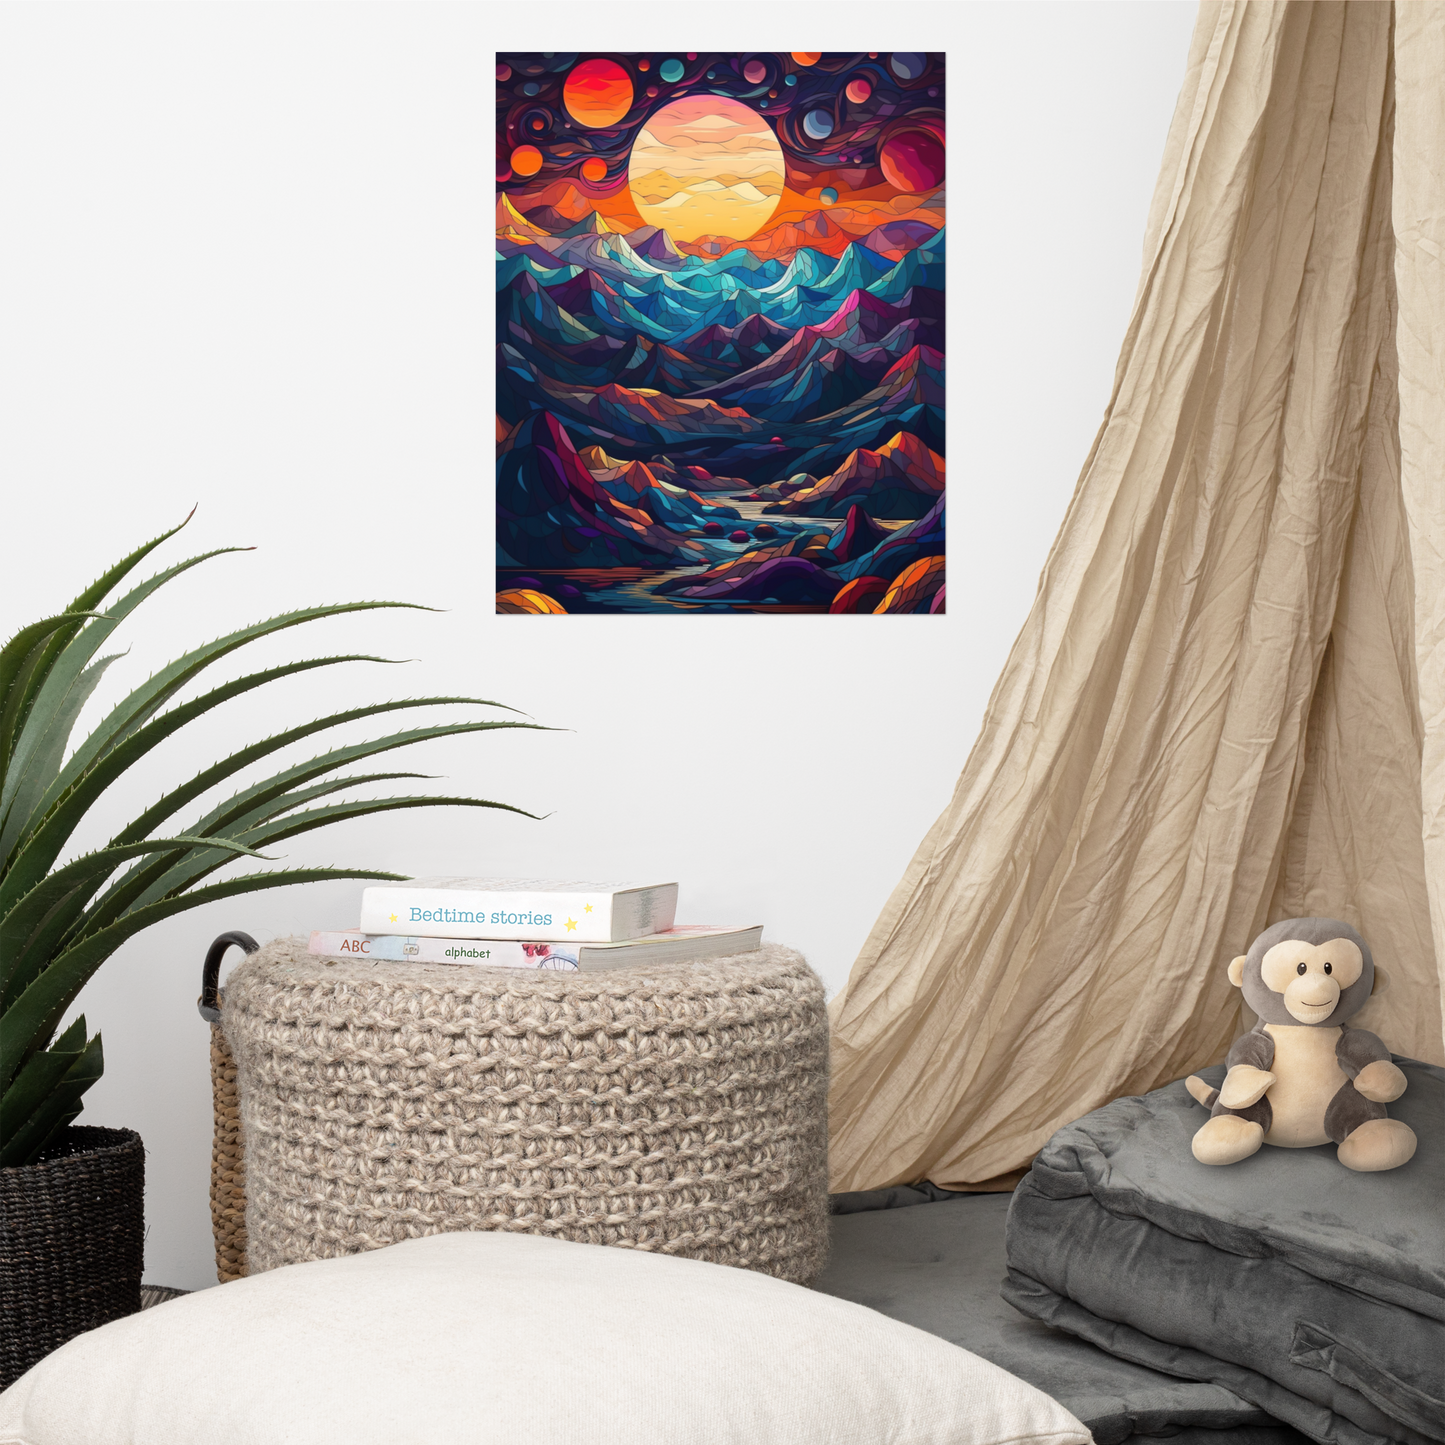 Otherworldly Beauty: Colorful Mountains, Planets, and Sunset Fantasy Poster Art